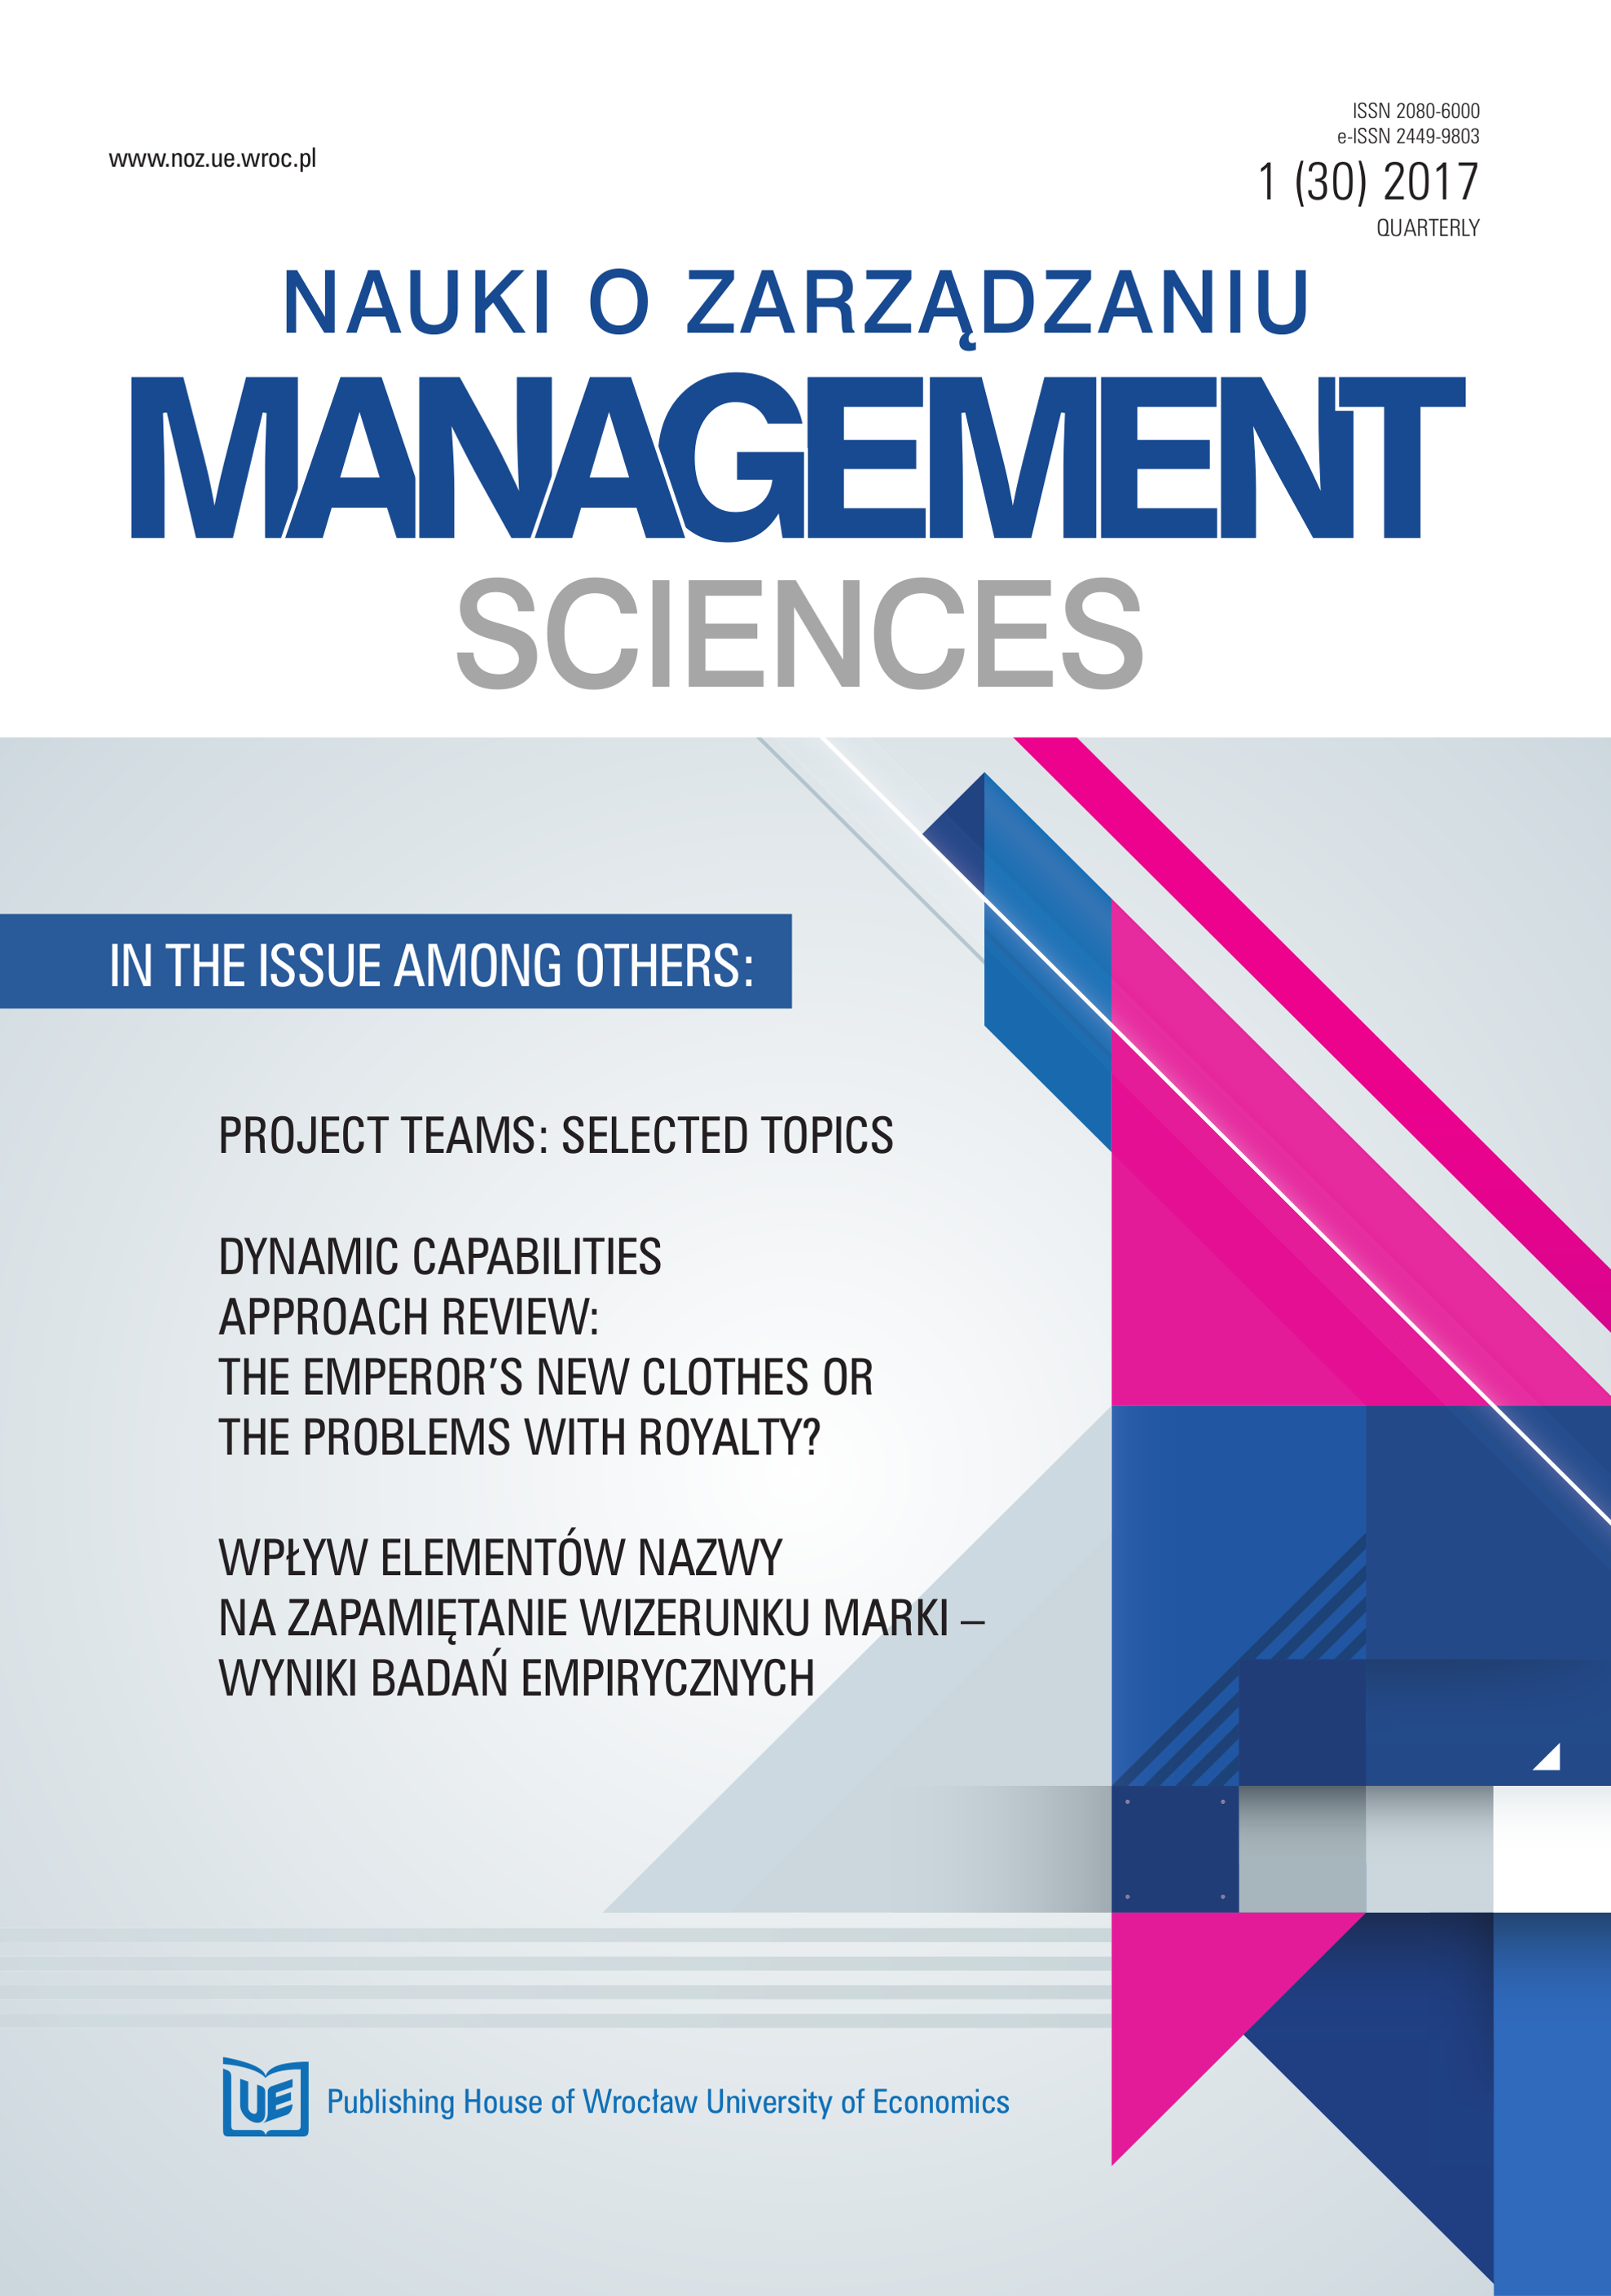 Evolution of change management models and their future in the context of ONA Cover Image